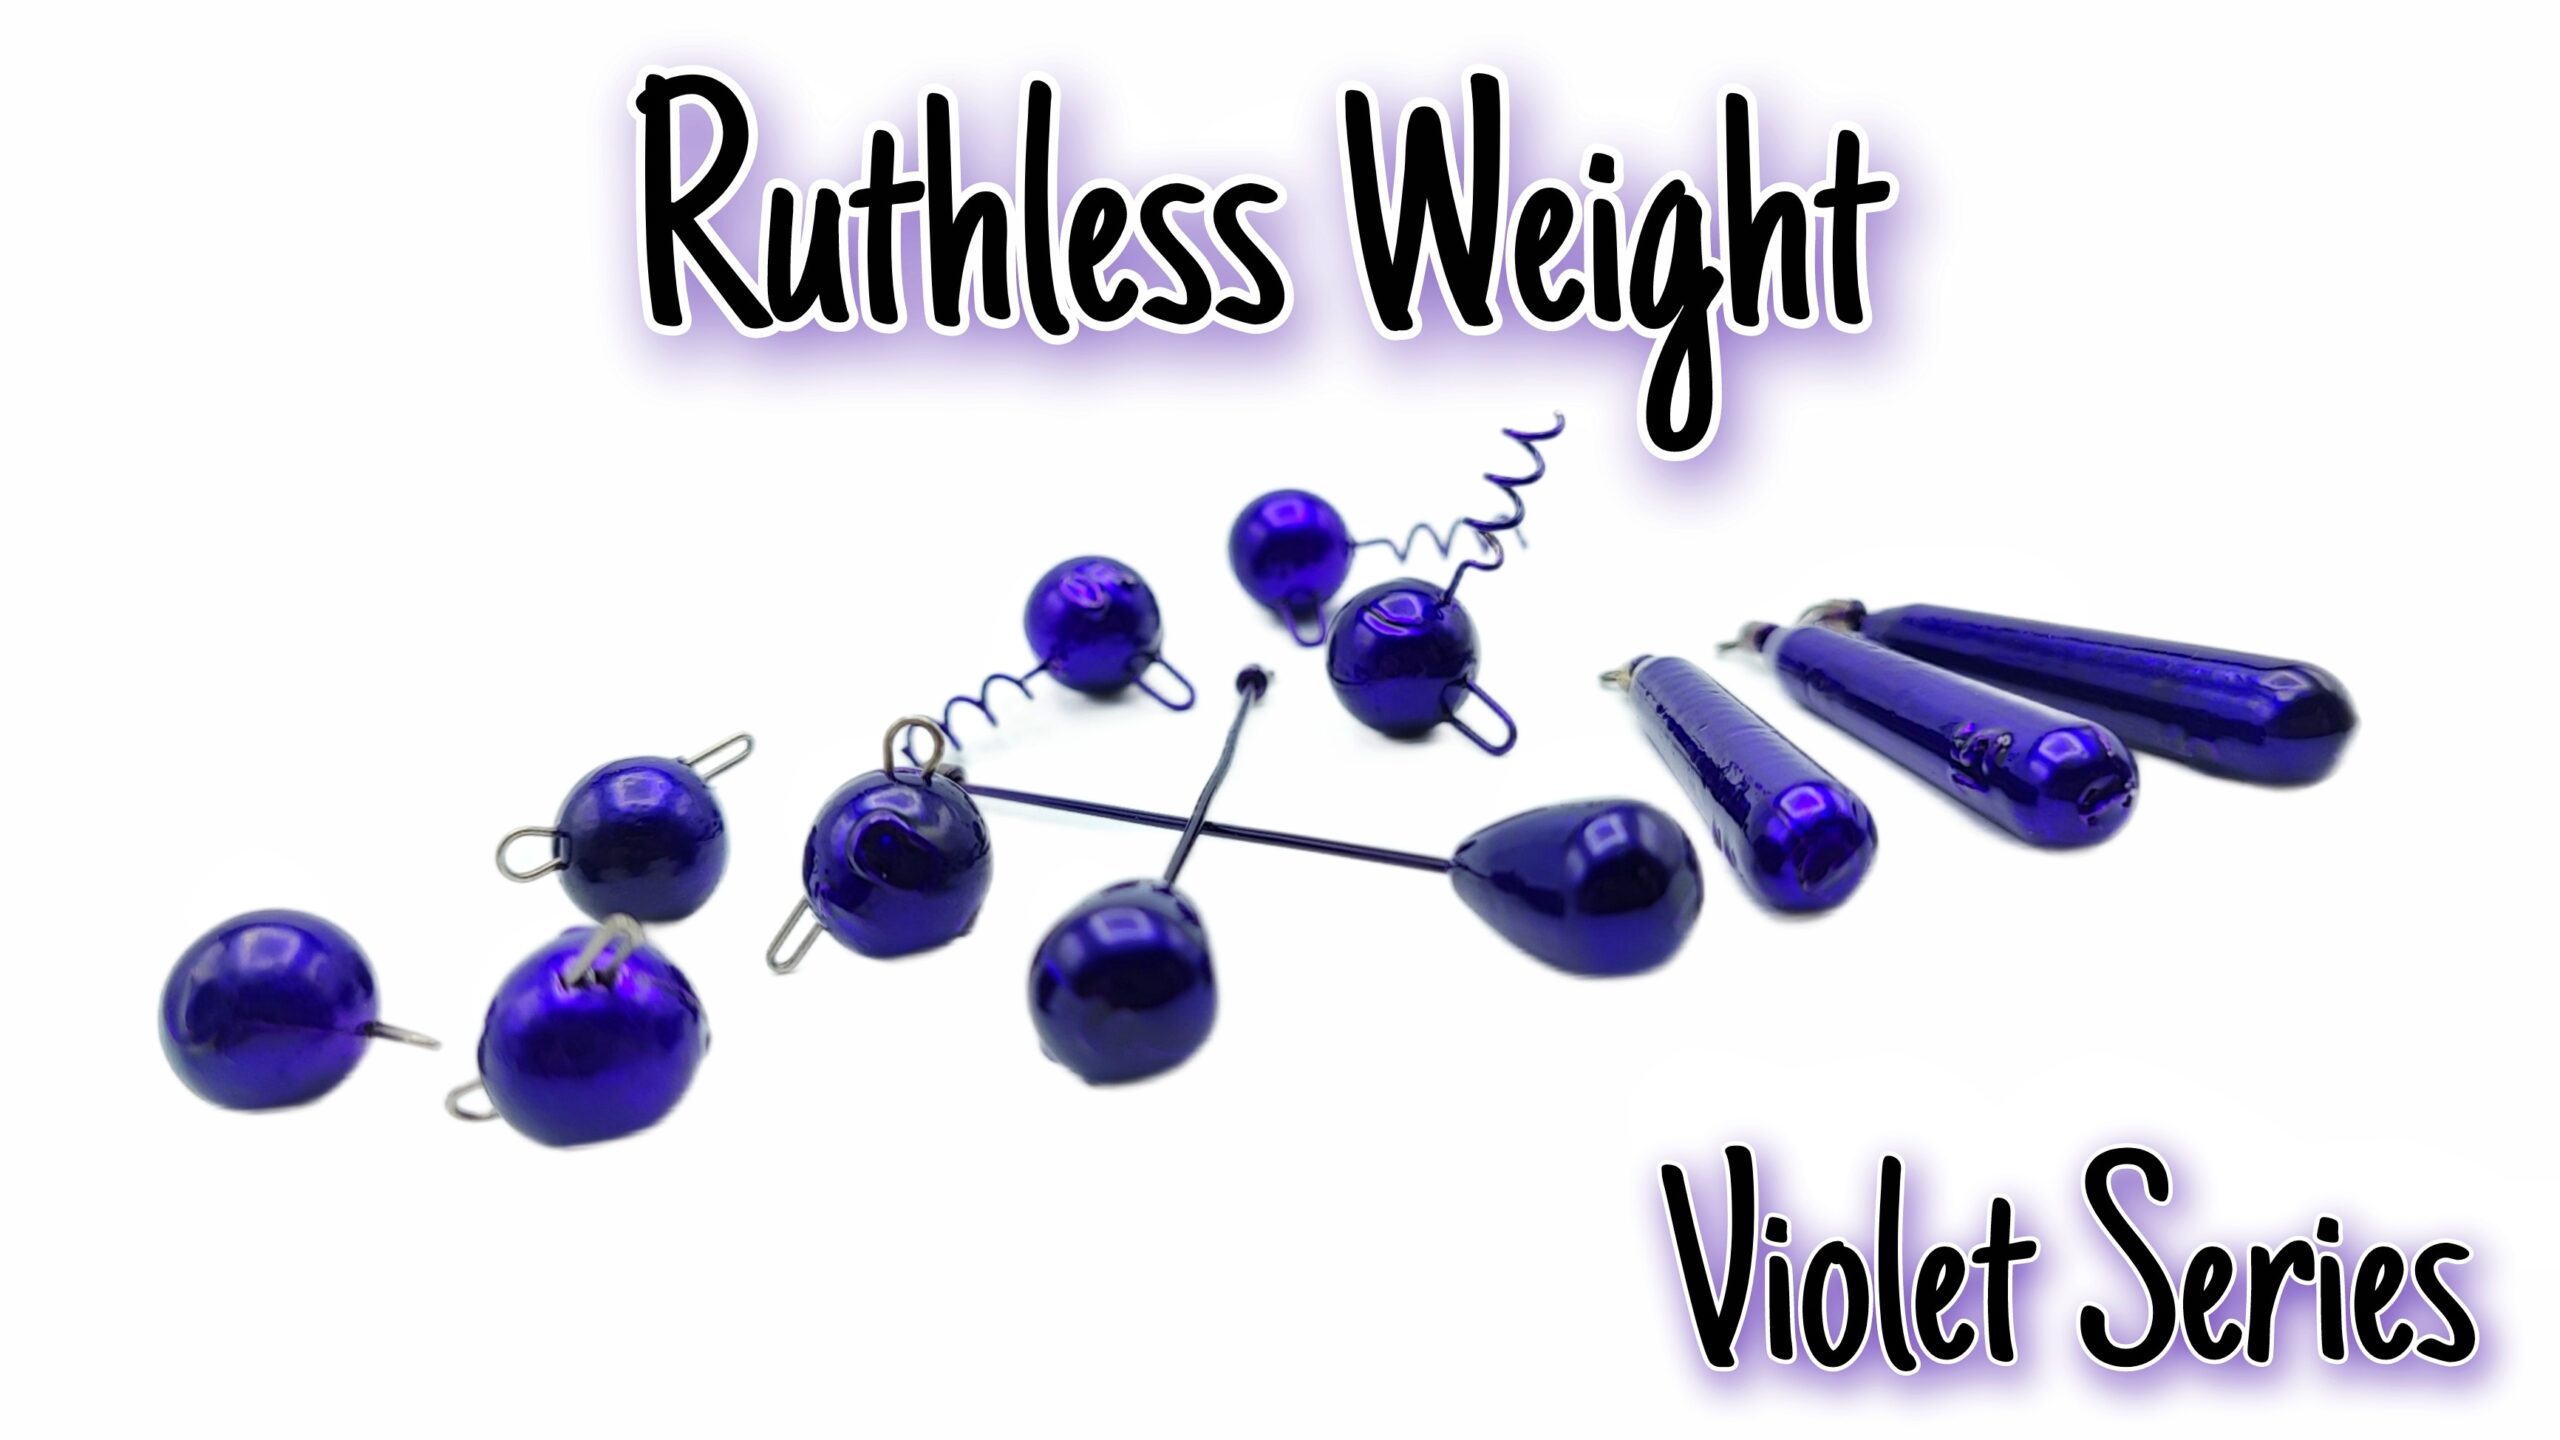 You are currently viewing Ruthless Weight Violet Series – Erilaiset jigirigaukset